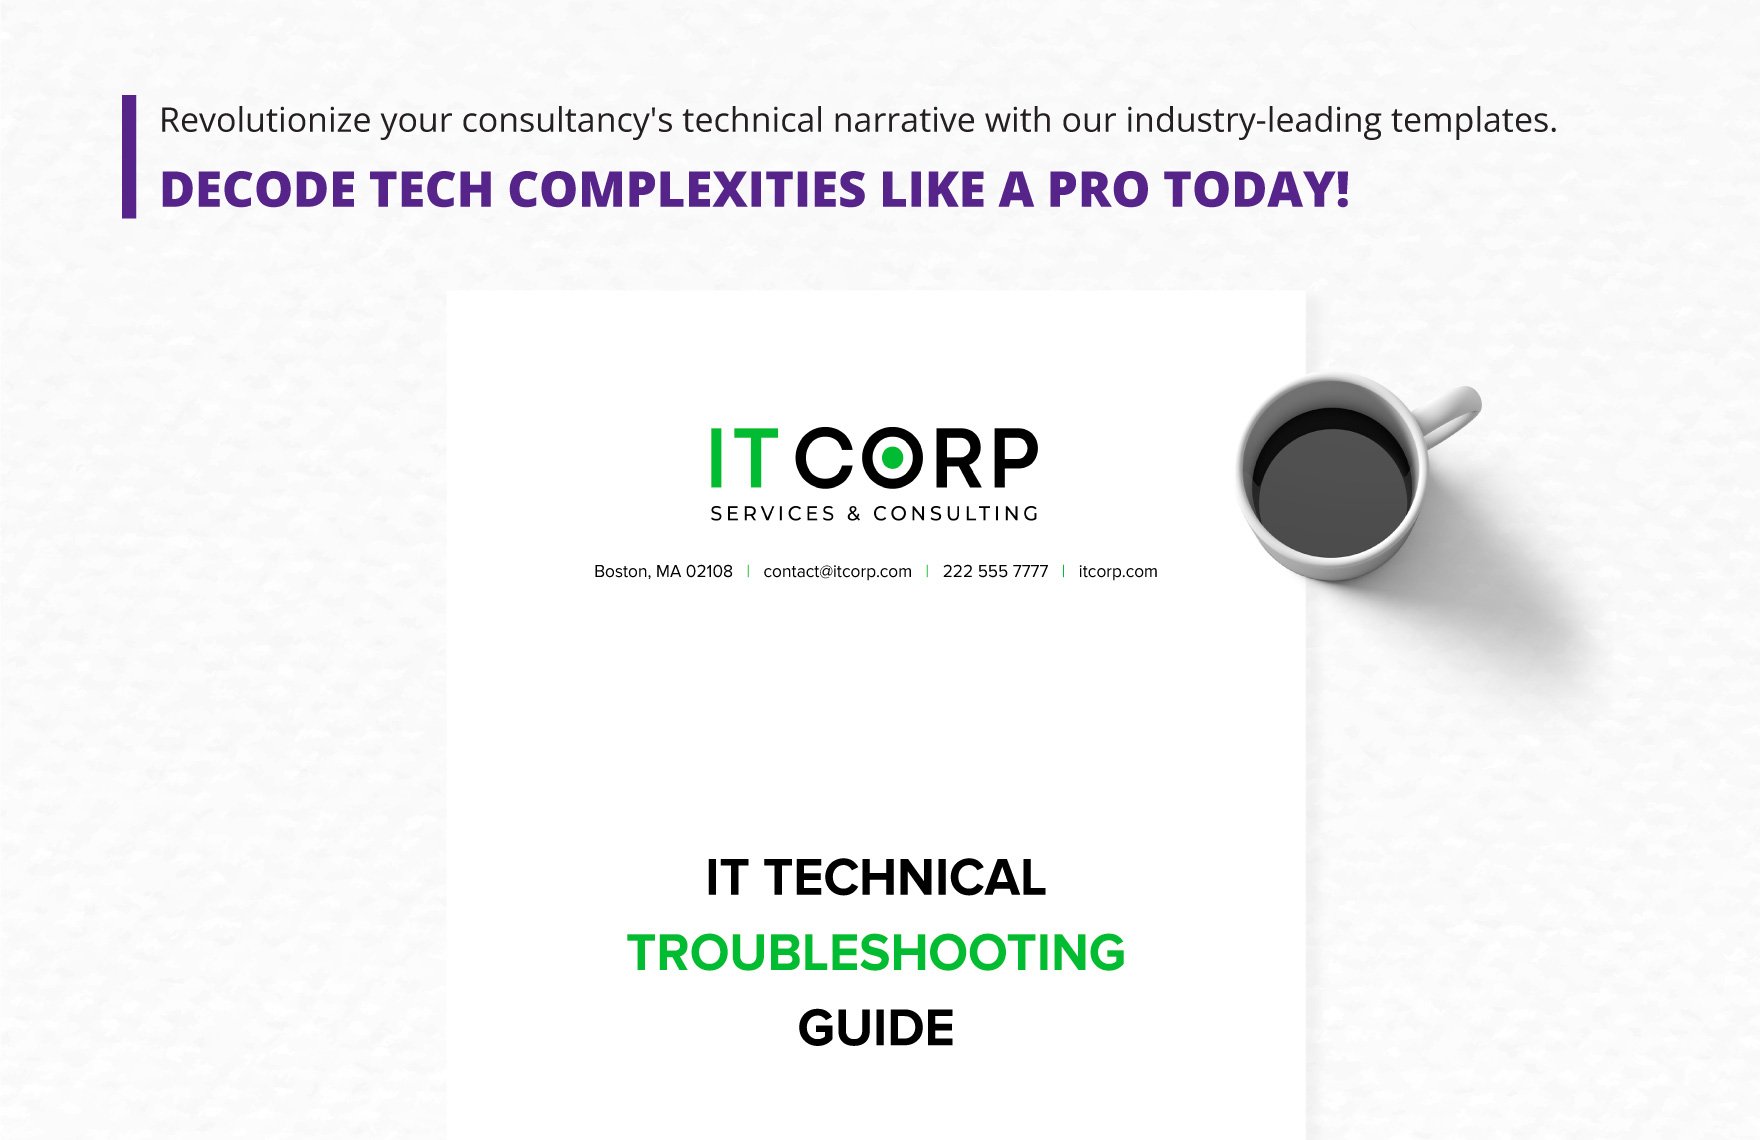 IT Technical Troubleshooting Guide Template